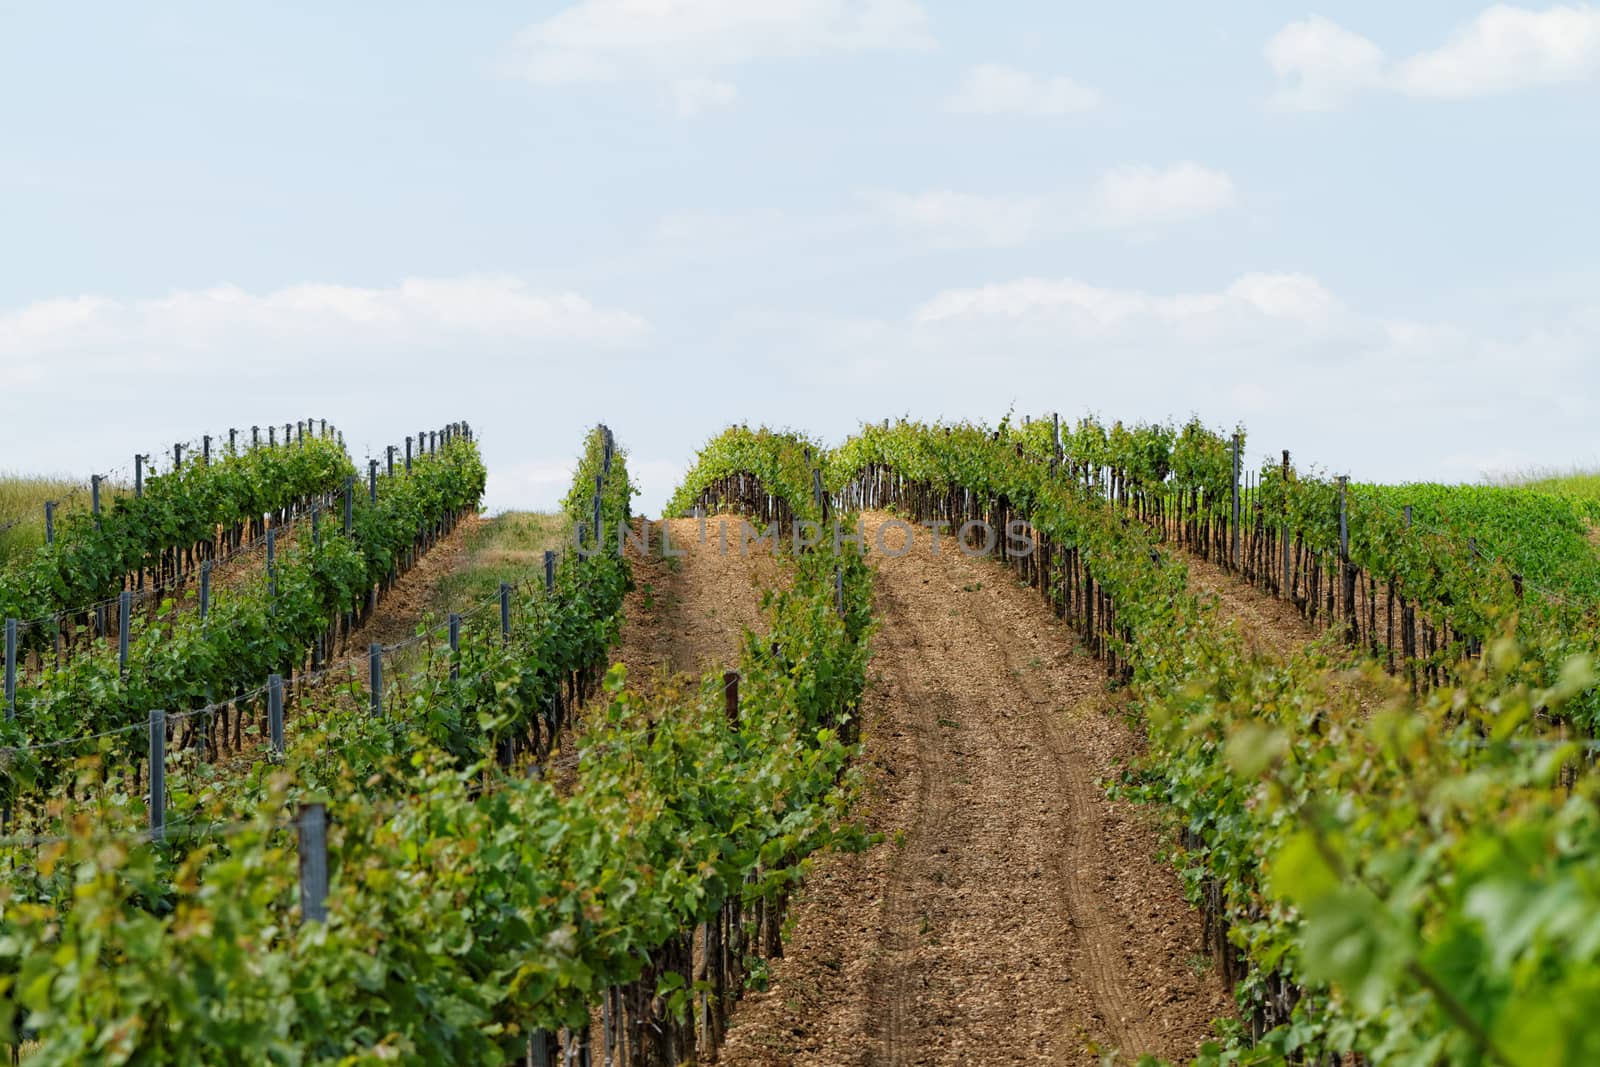 Beautiful landscape in the Tokay grapes - Hungary 